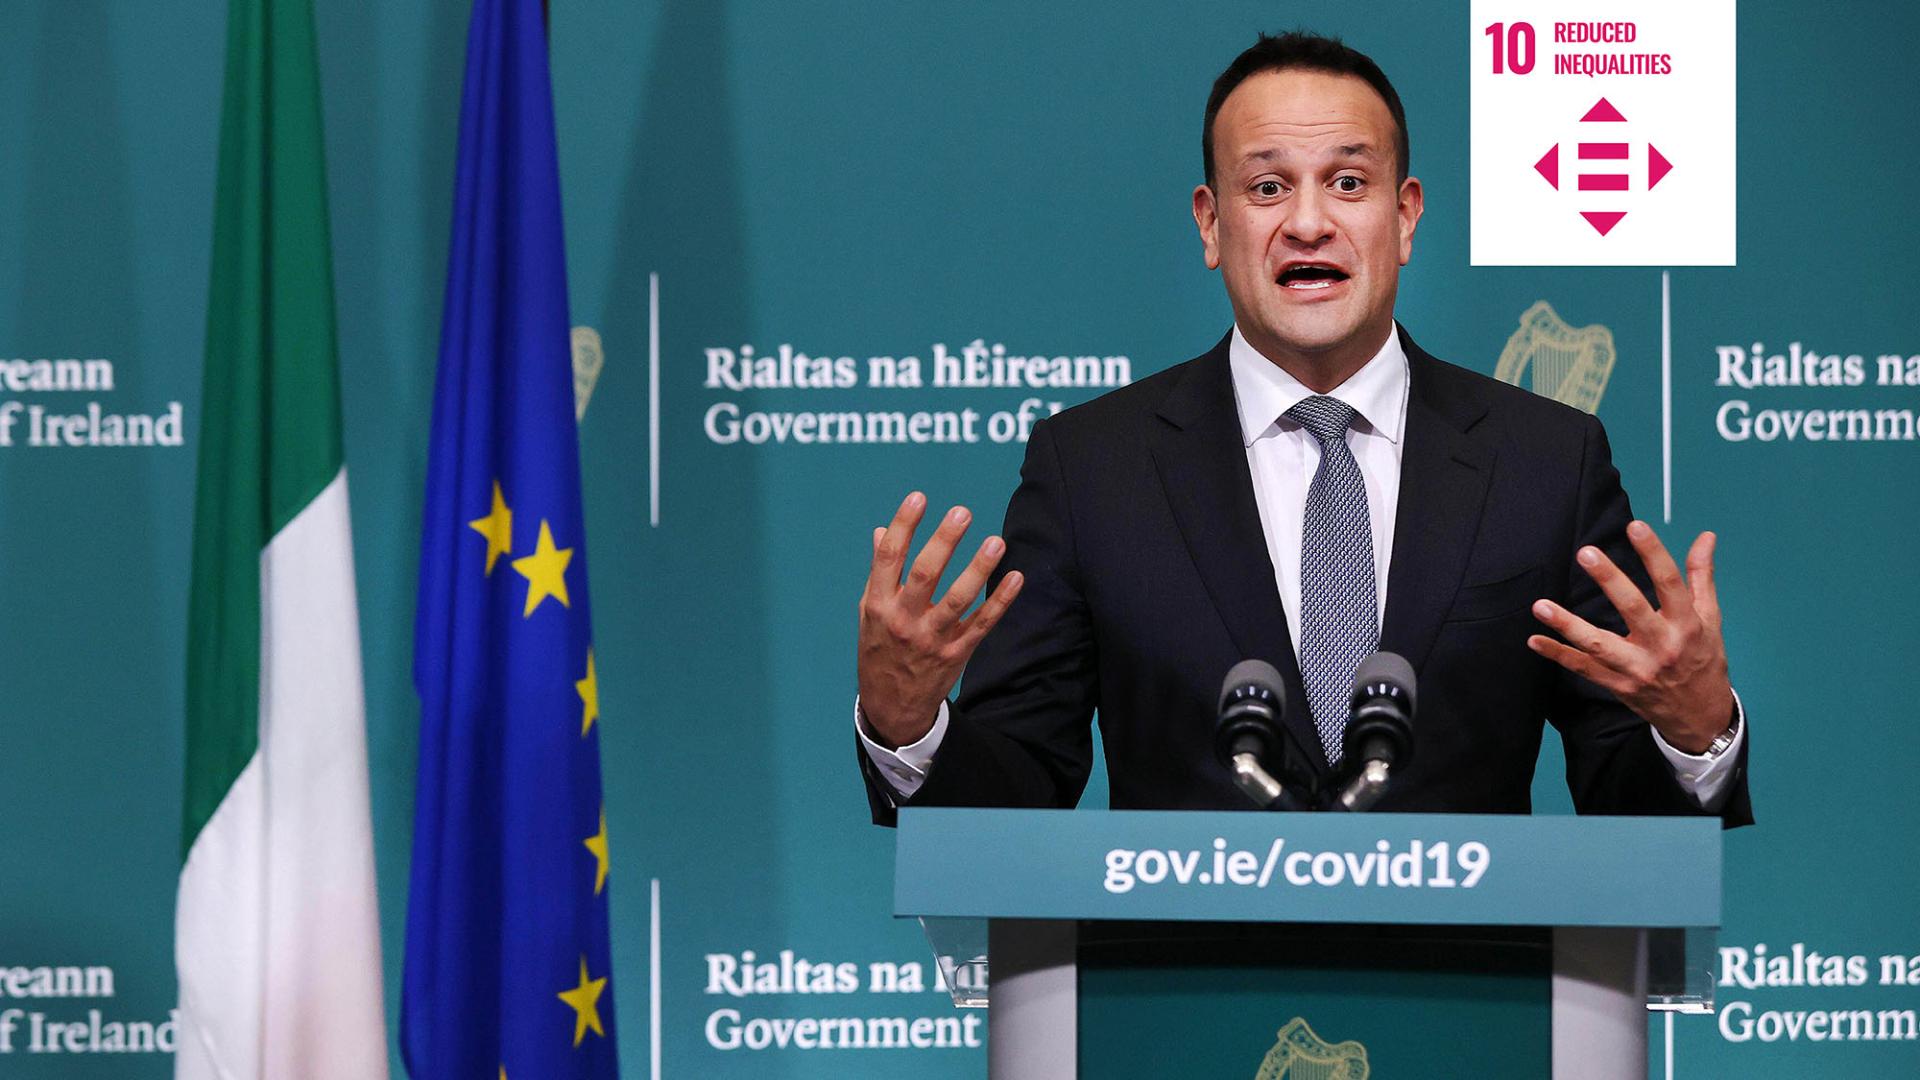 Shows Leo Varadkar giving a public address during the Covid-19 pandemic with icon signifying UN Sustainable development goal 10